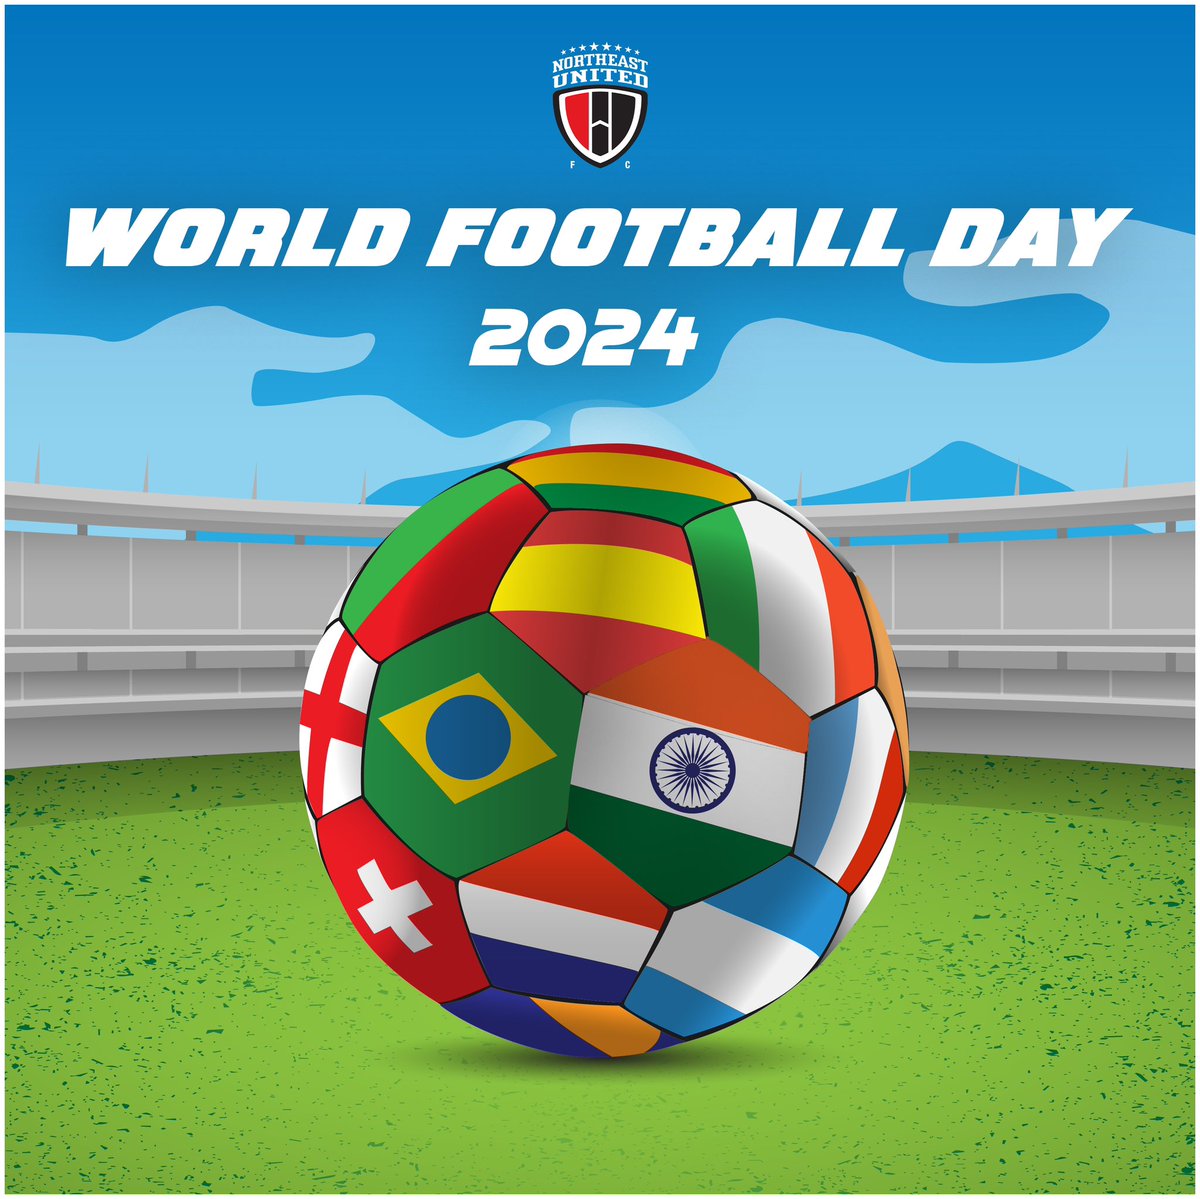 The sport which we live and die for. ⚽️❤️ #WorldFootballDay #NEUFC #StrongerAsOne #8States1United